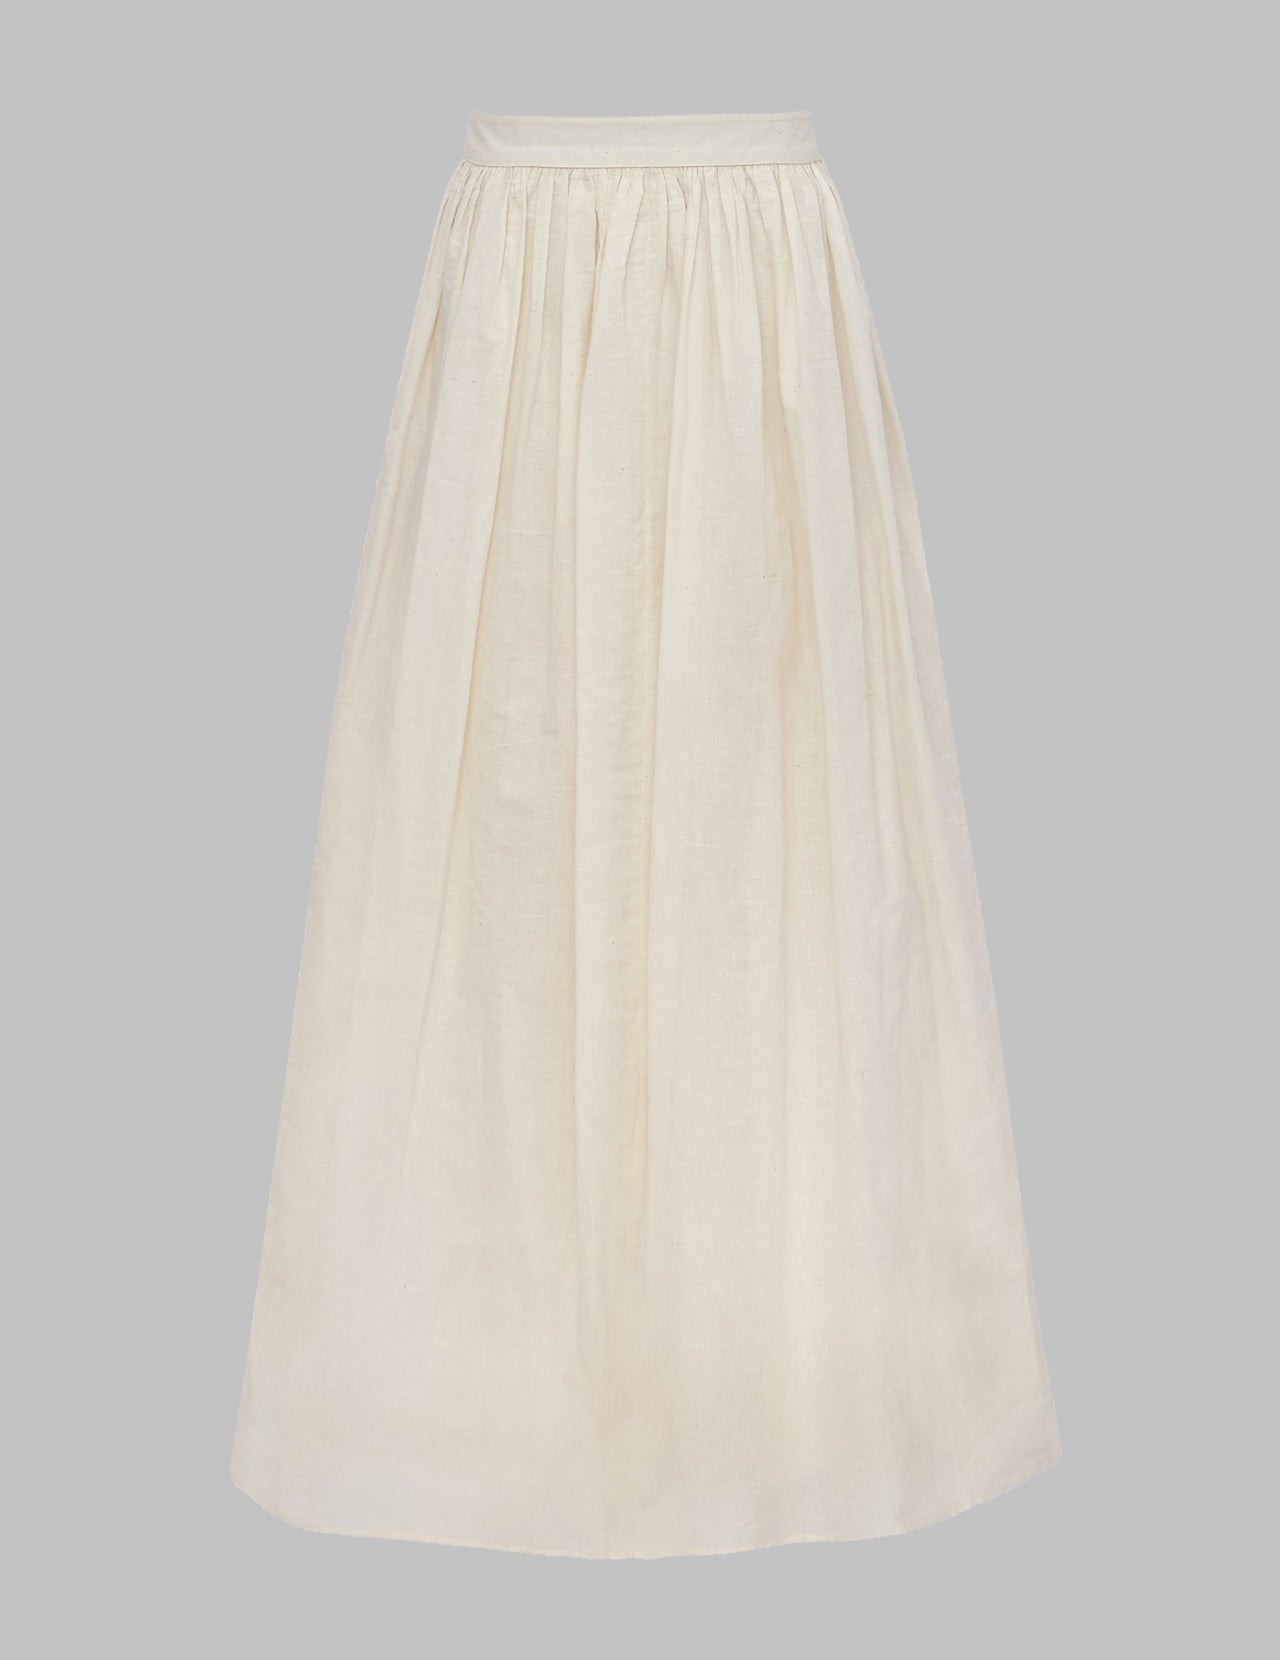  Off White Cotton A-Line Skirt 